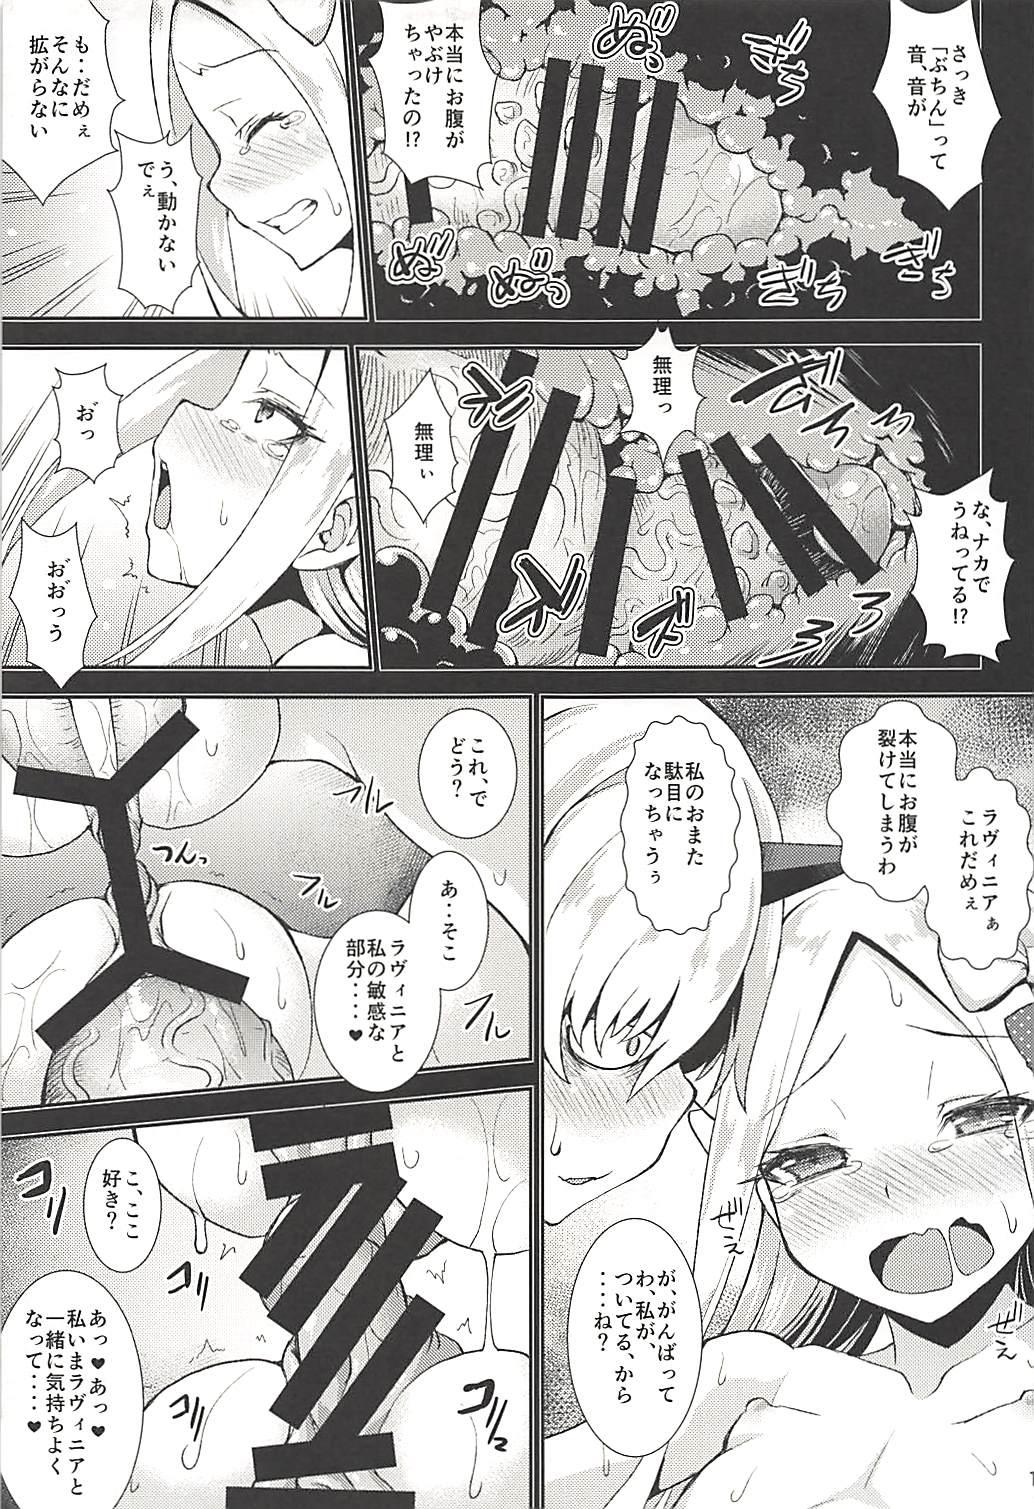 Doll Abby to Yume no Zangeshitsu - Abigail in the Confession chamber of Dream - Fate grand order Fuck - Page 12